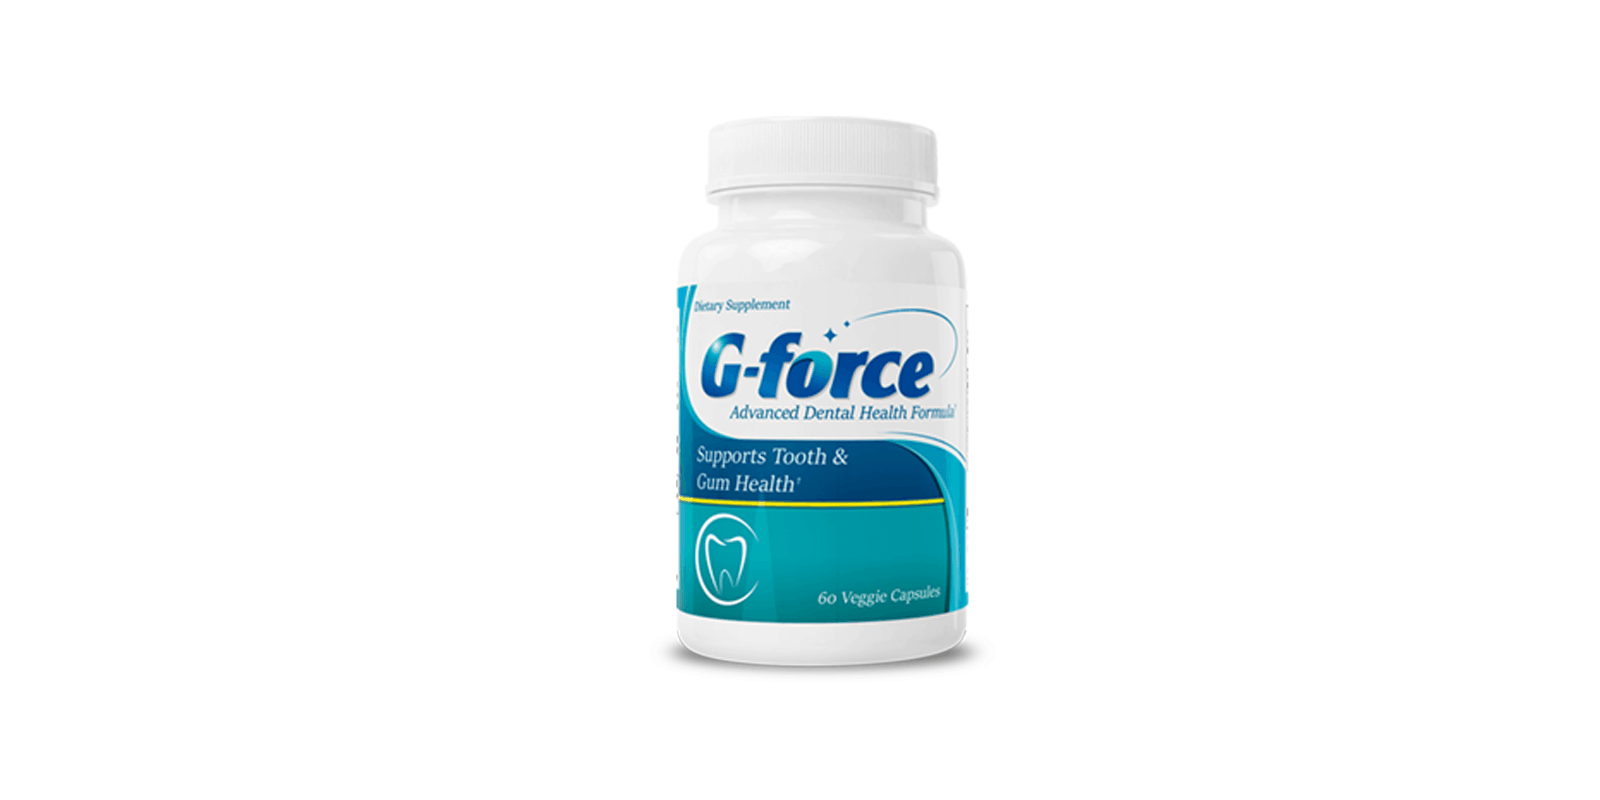 G-Force-dental-health-supplement-review